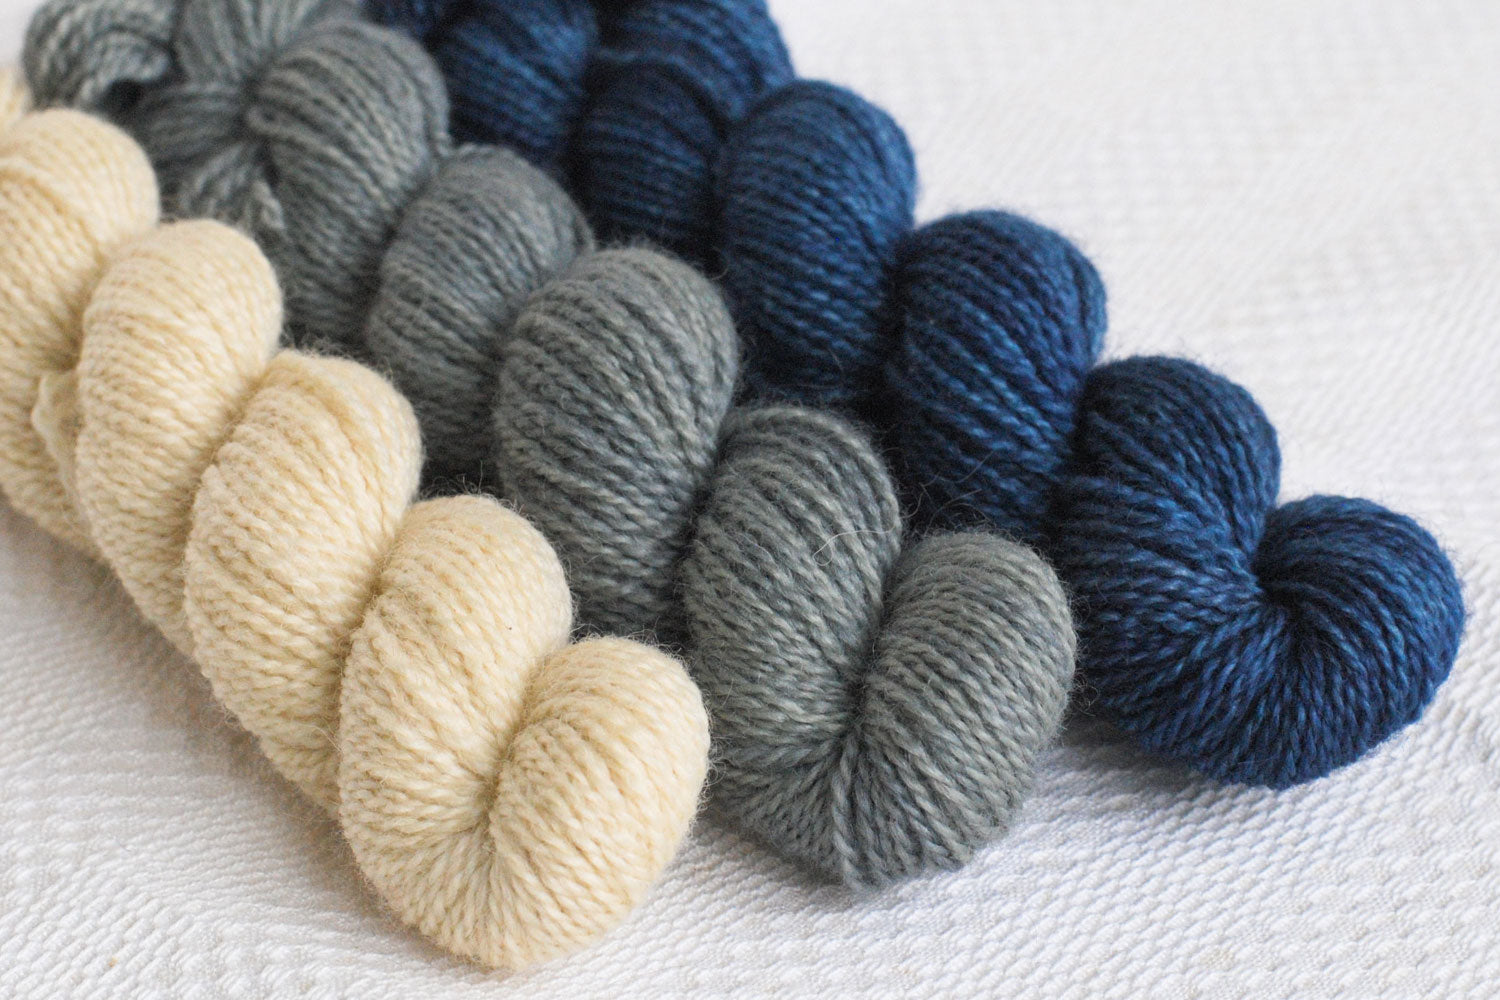 Set of three hand-dyed mini-skeins in natural, grey, and dark blue